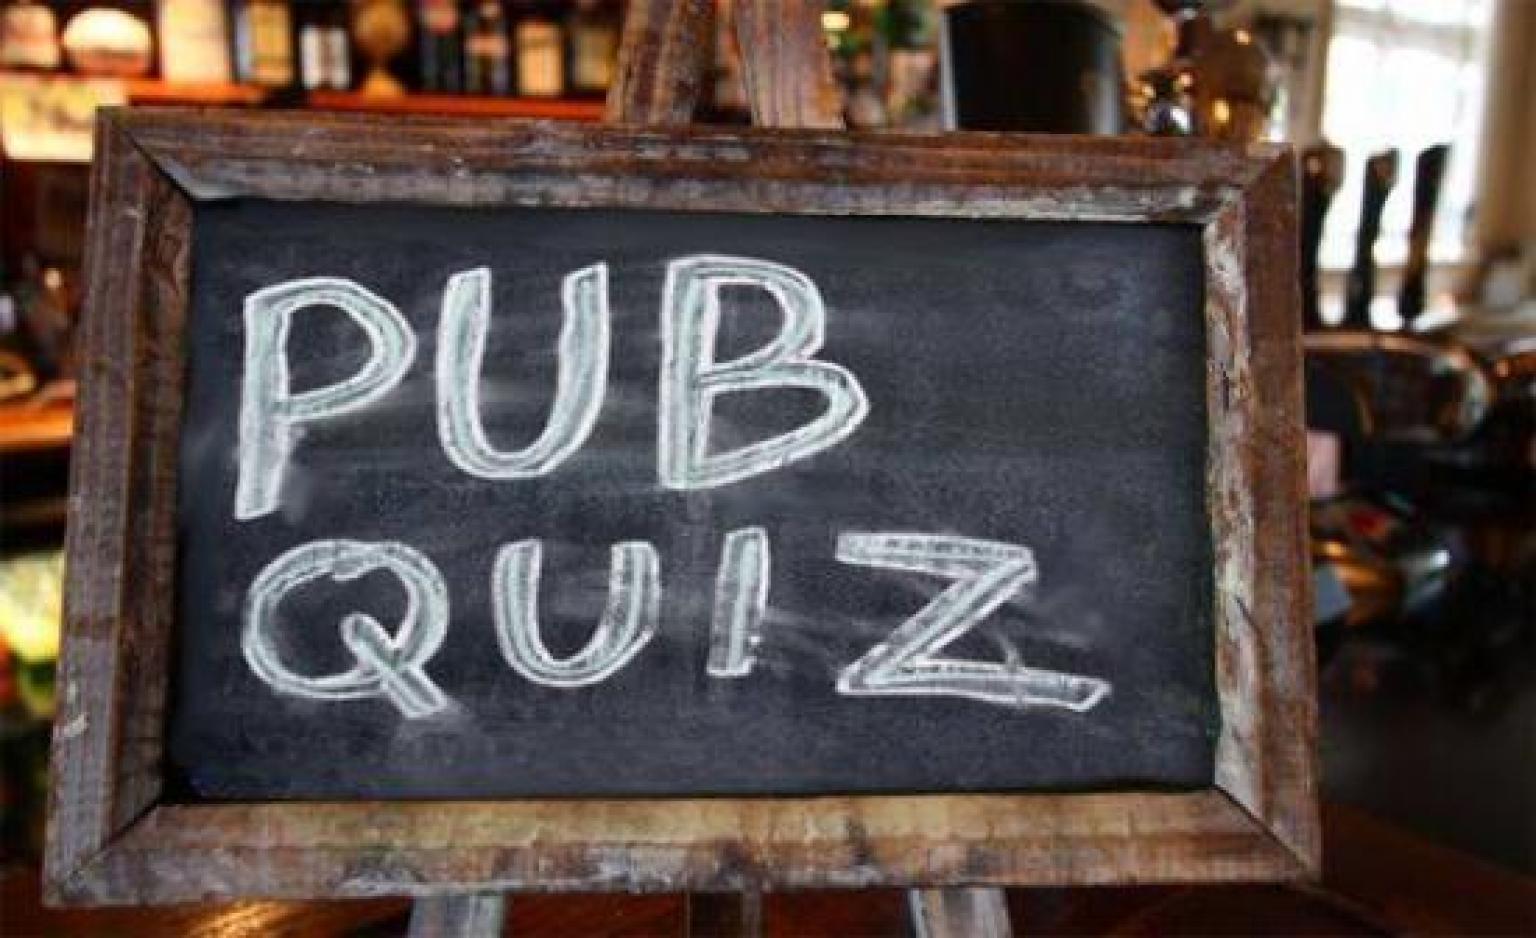 If Pubs Did a Baby Quiz